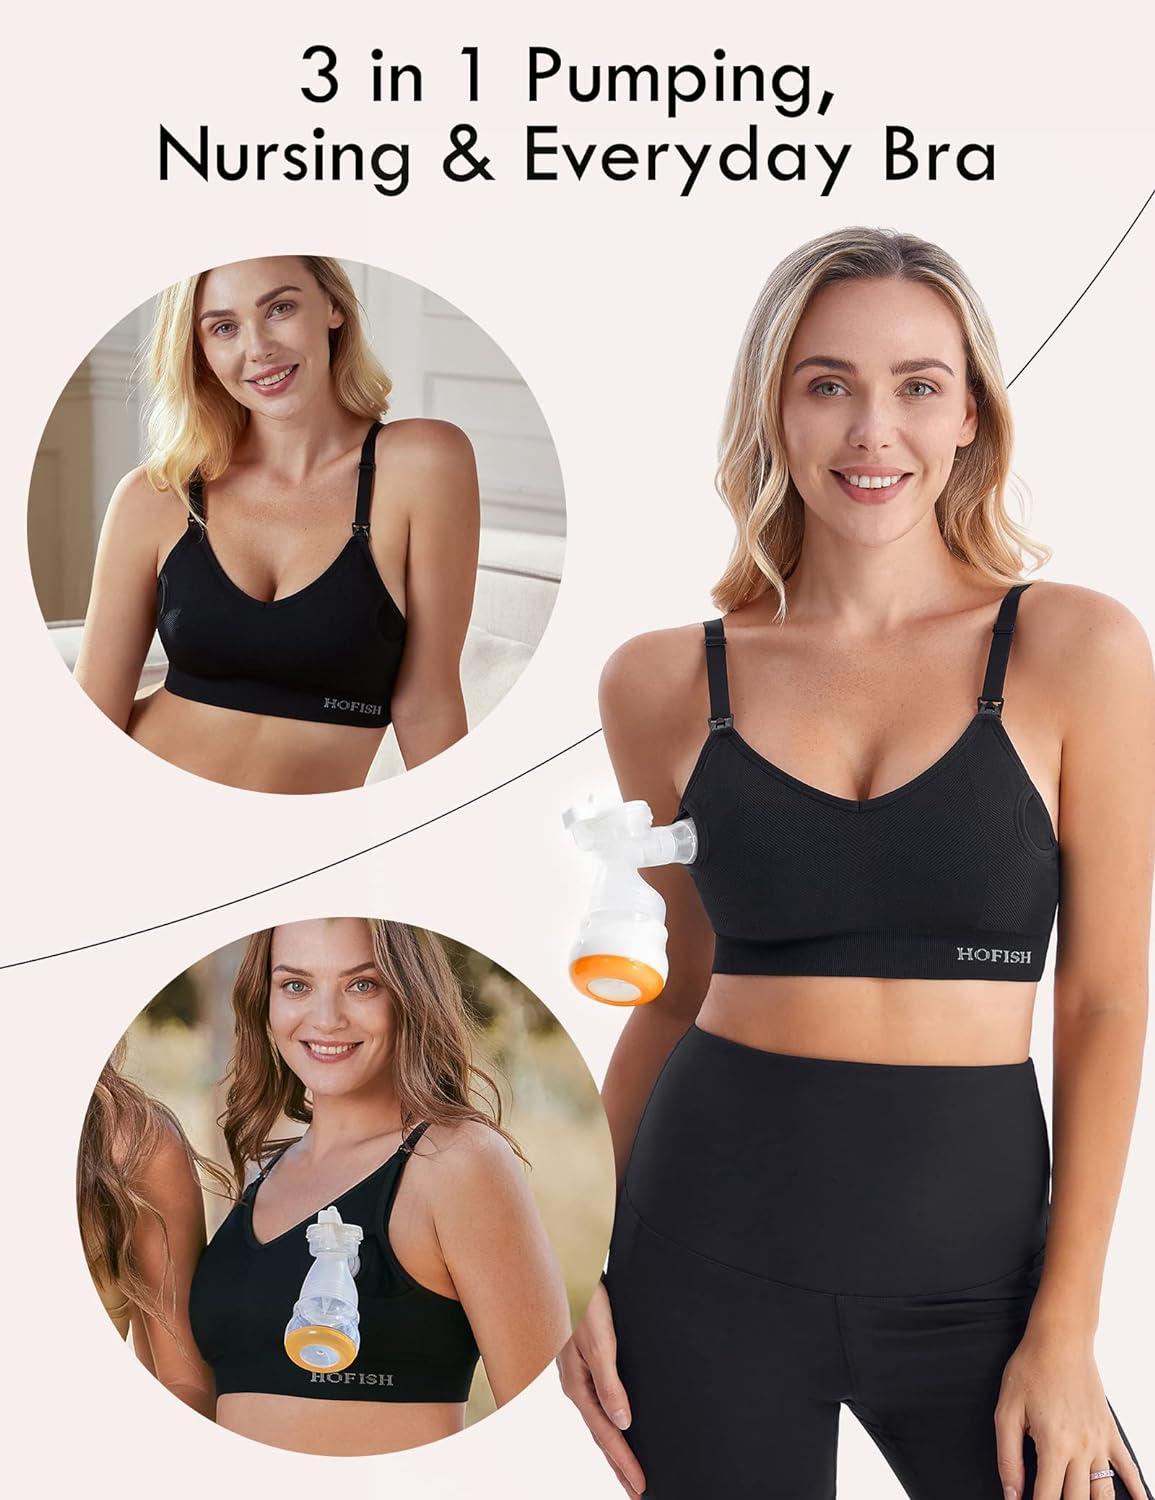 Bodily Hands-Free Pumping Bra - Exclusive Pumping